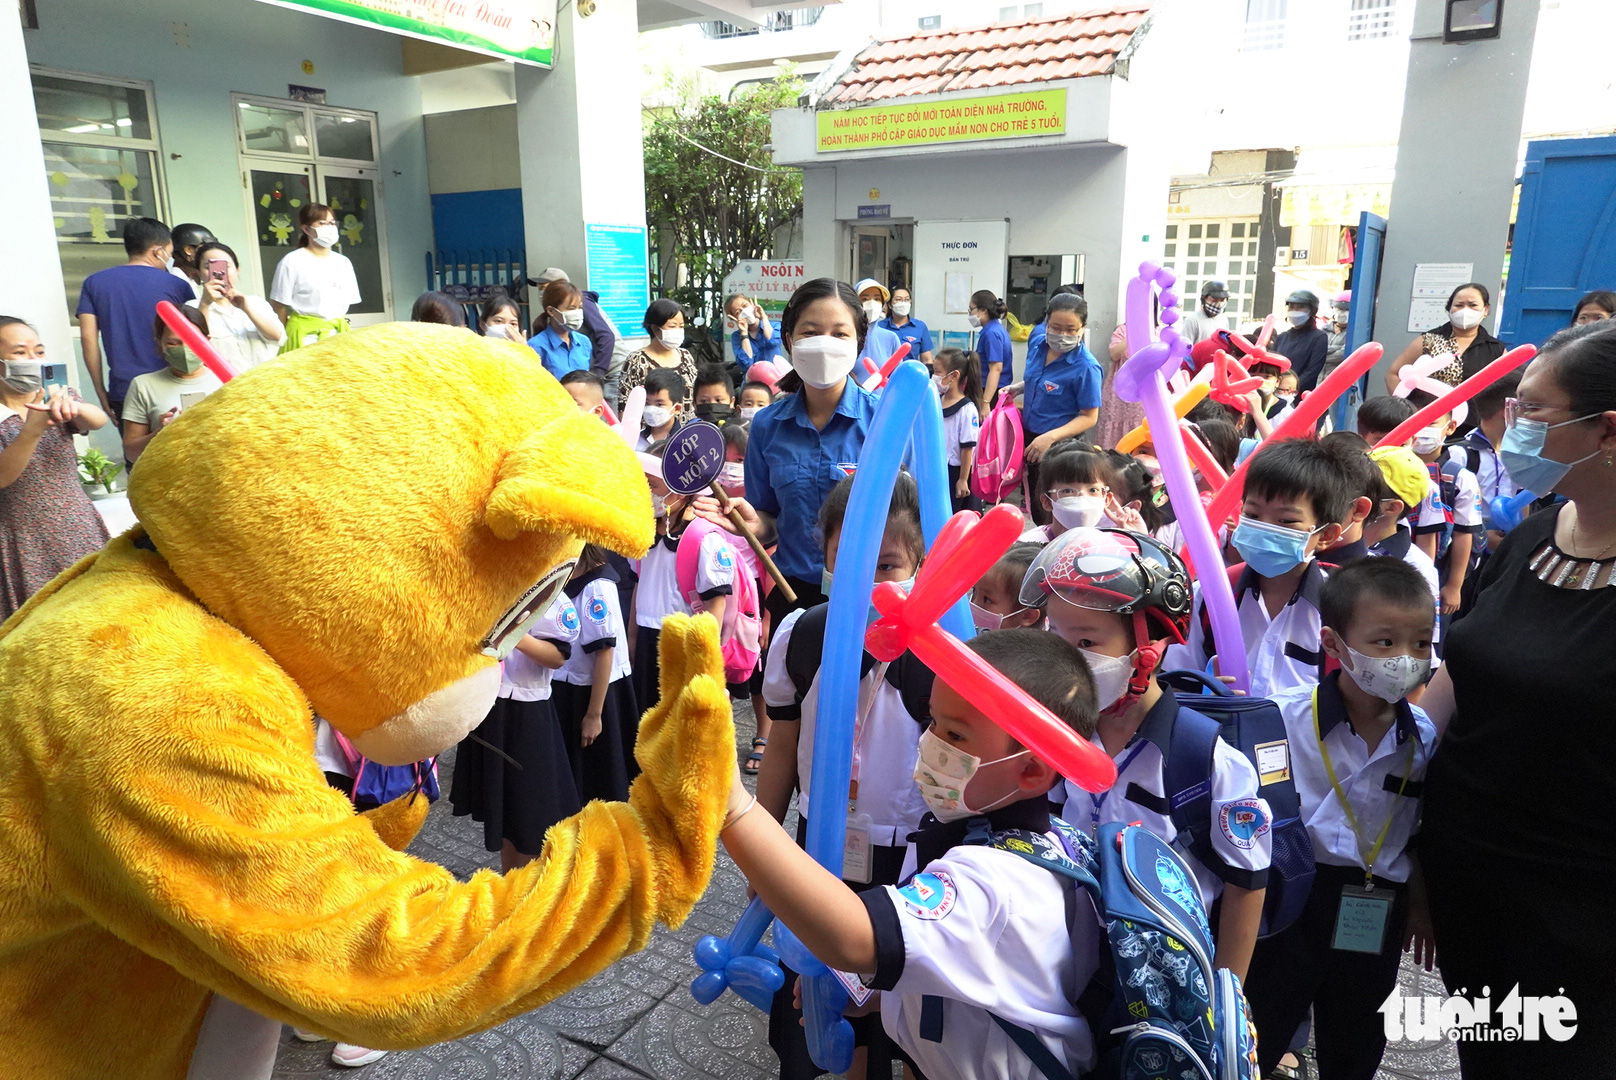 Students back to school in Ho Chi Minh City